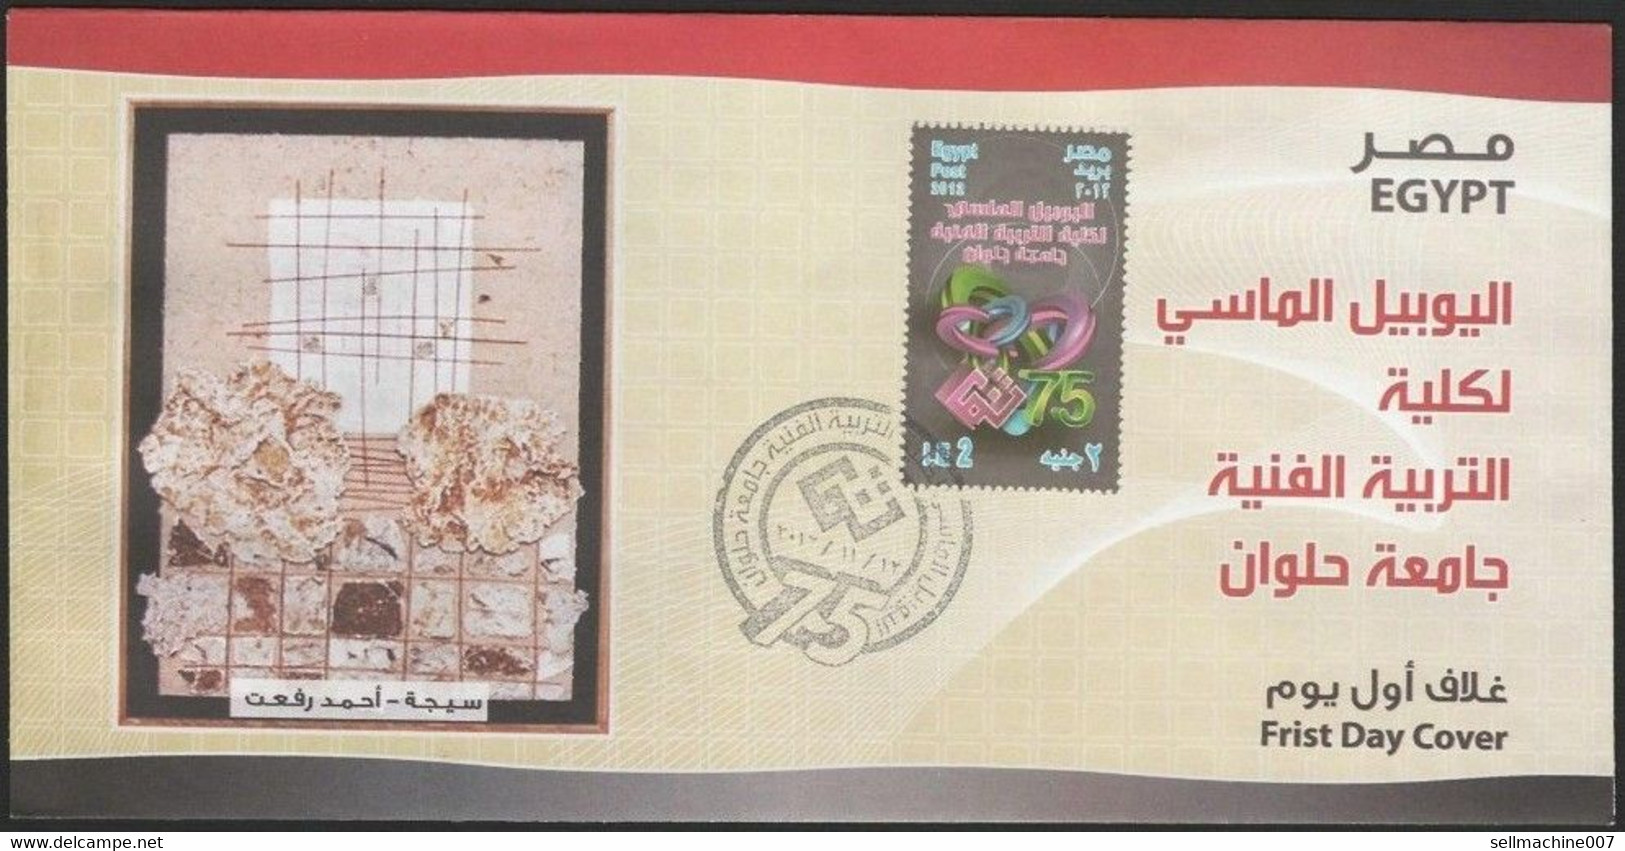 Egypt 2012 FDC SET OF 5 Different Covers FACULTY OF ART HELWAN UNIVERSITY First Day Cover - Covers & Documents